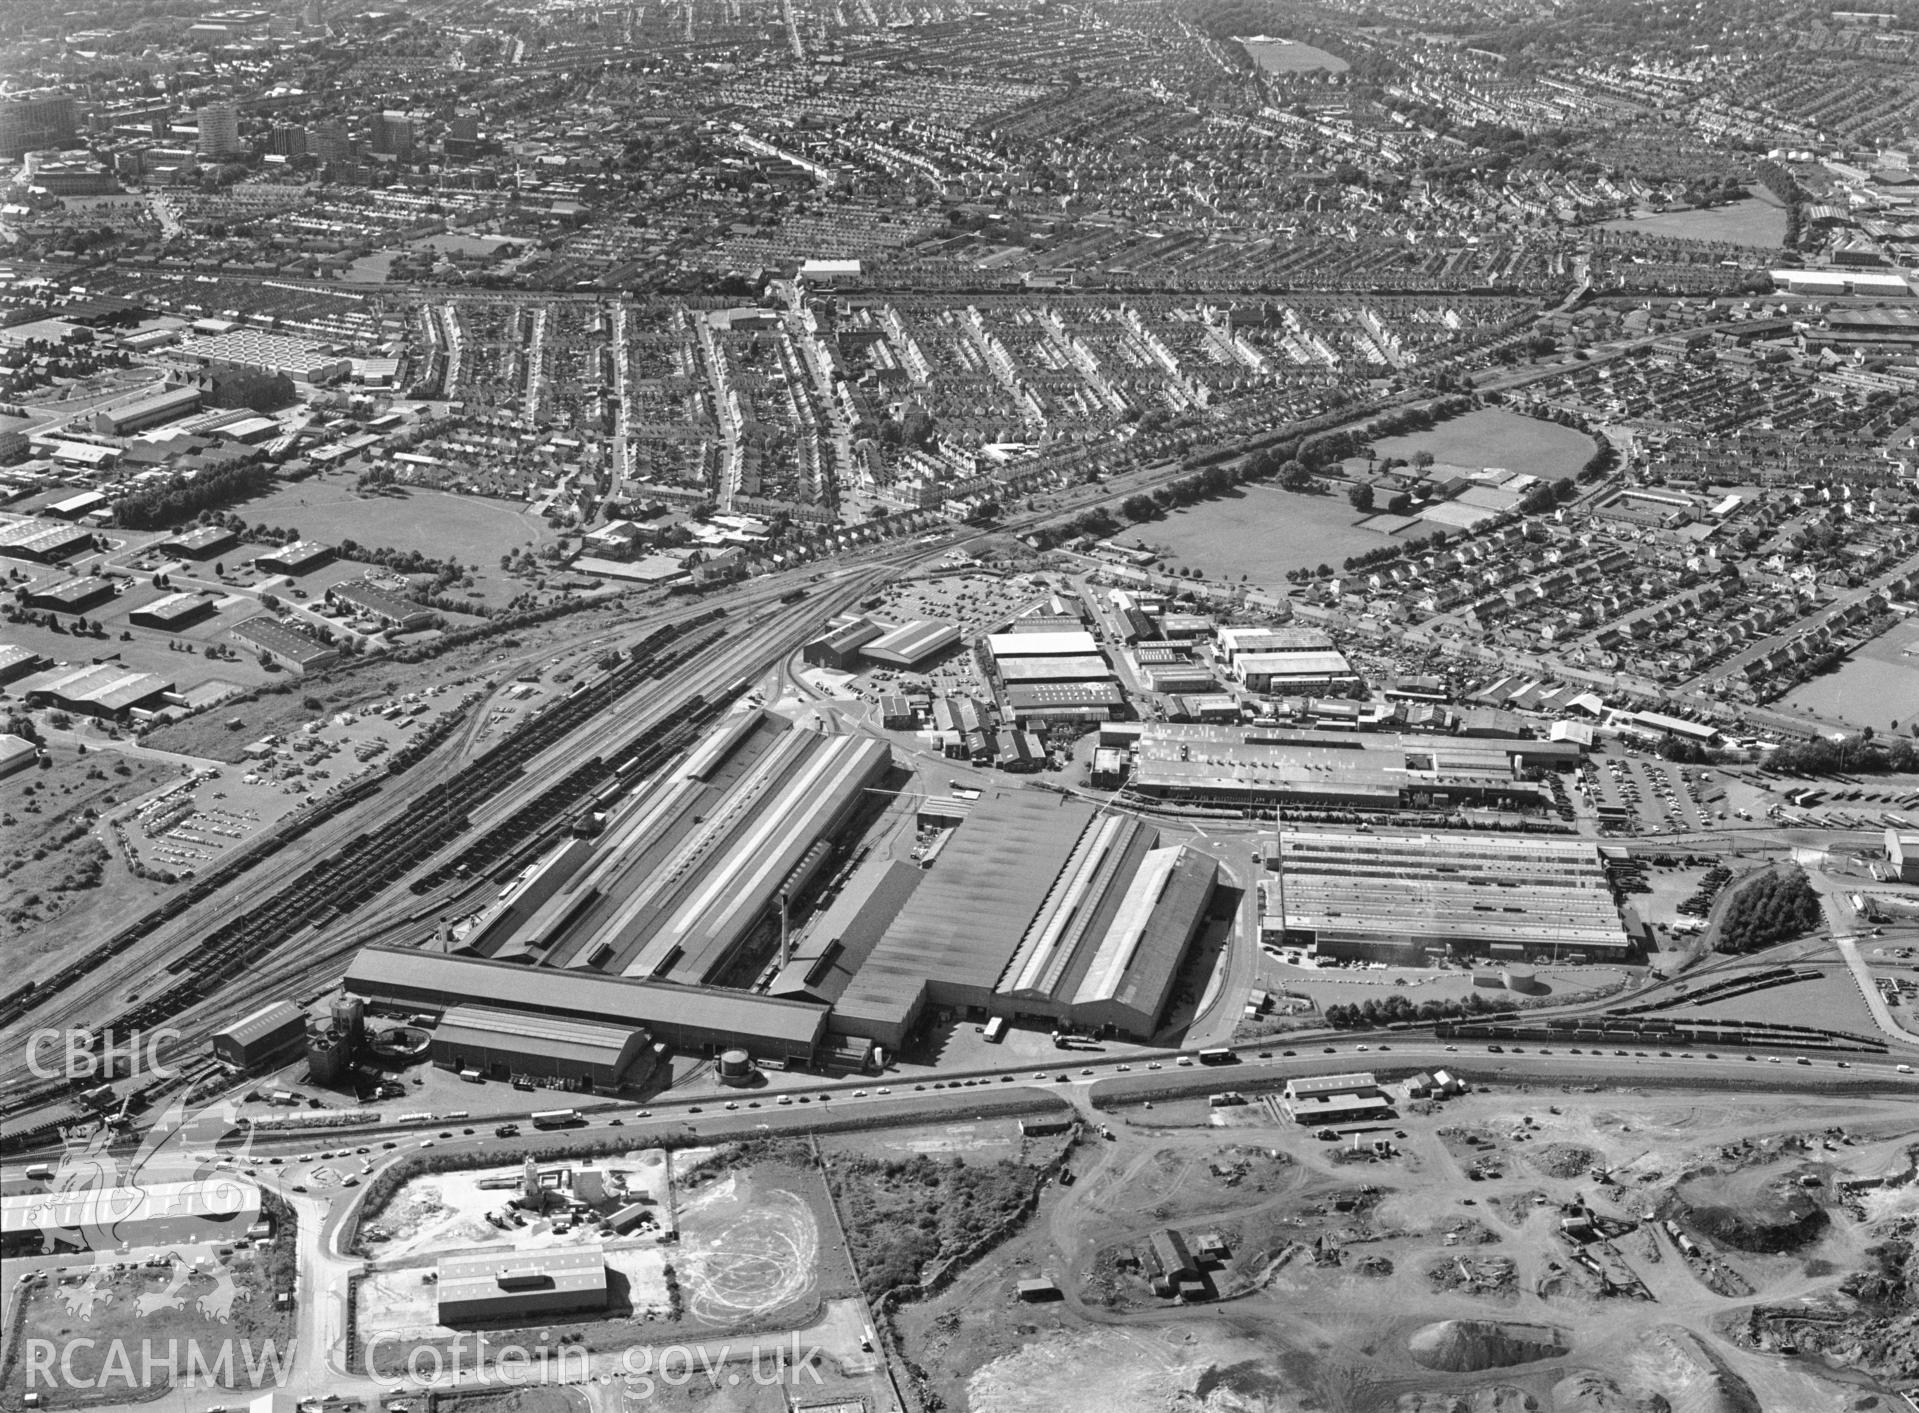 RCAHMW black and white oblique aerial photograph of East Moors steel works. Taken by C R Musson on 20/07/1995